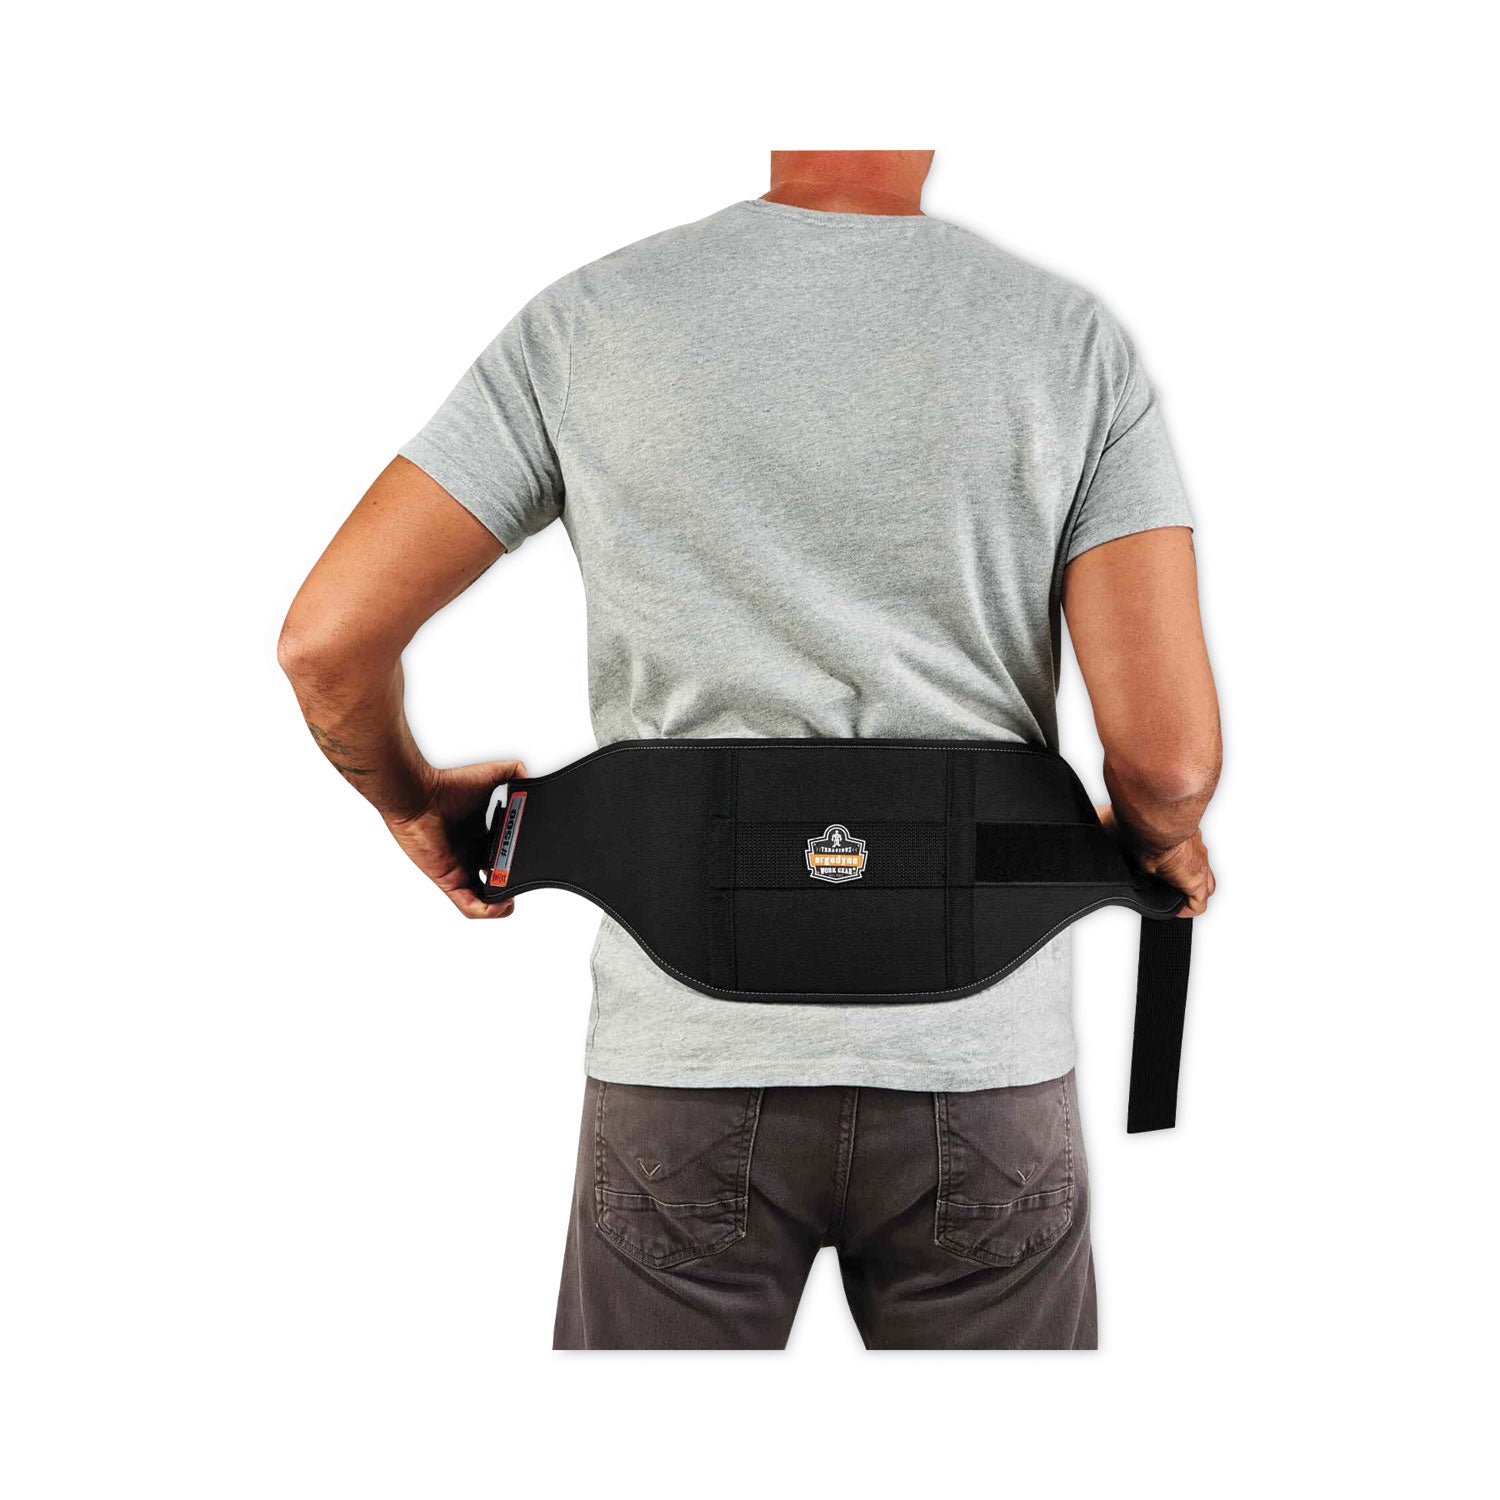 proflex-1500-weight-lifters-style-back-support-belt-small-25-to-30-waist-black-ships-in-1-3-business-days_ego11471 - 2